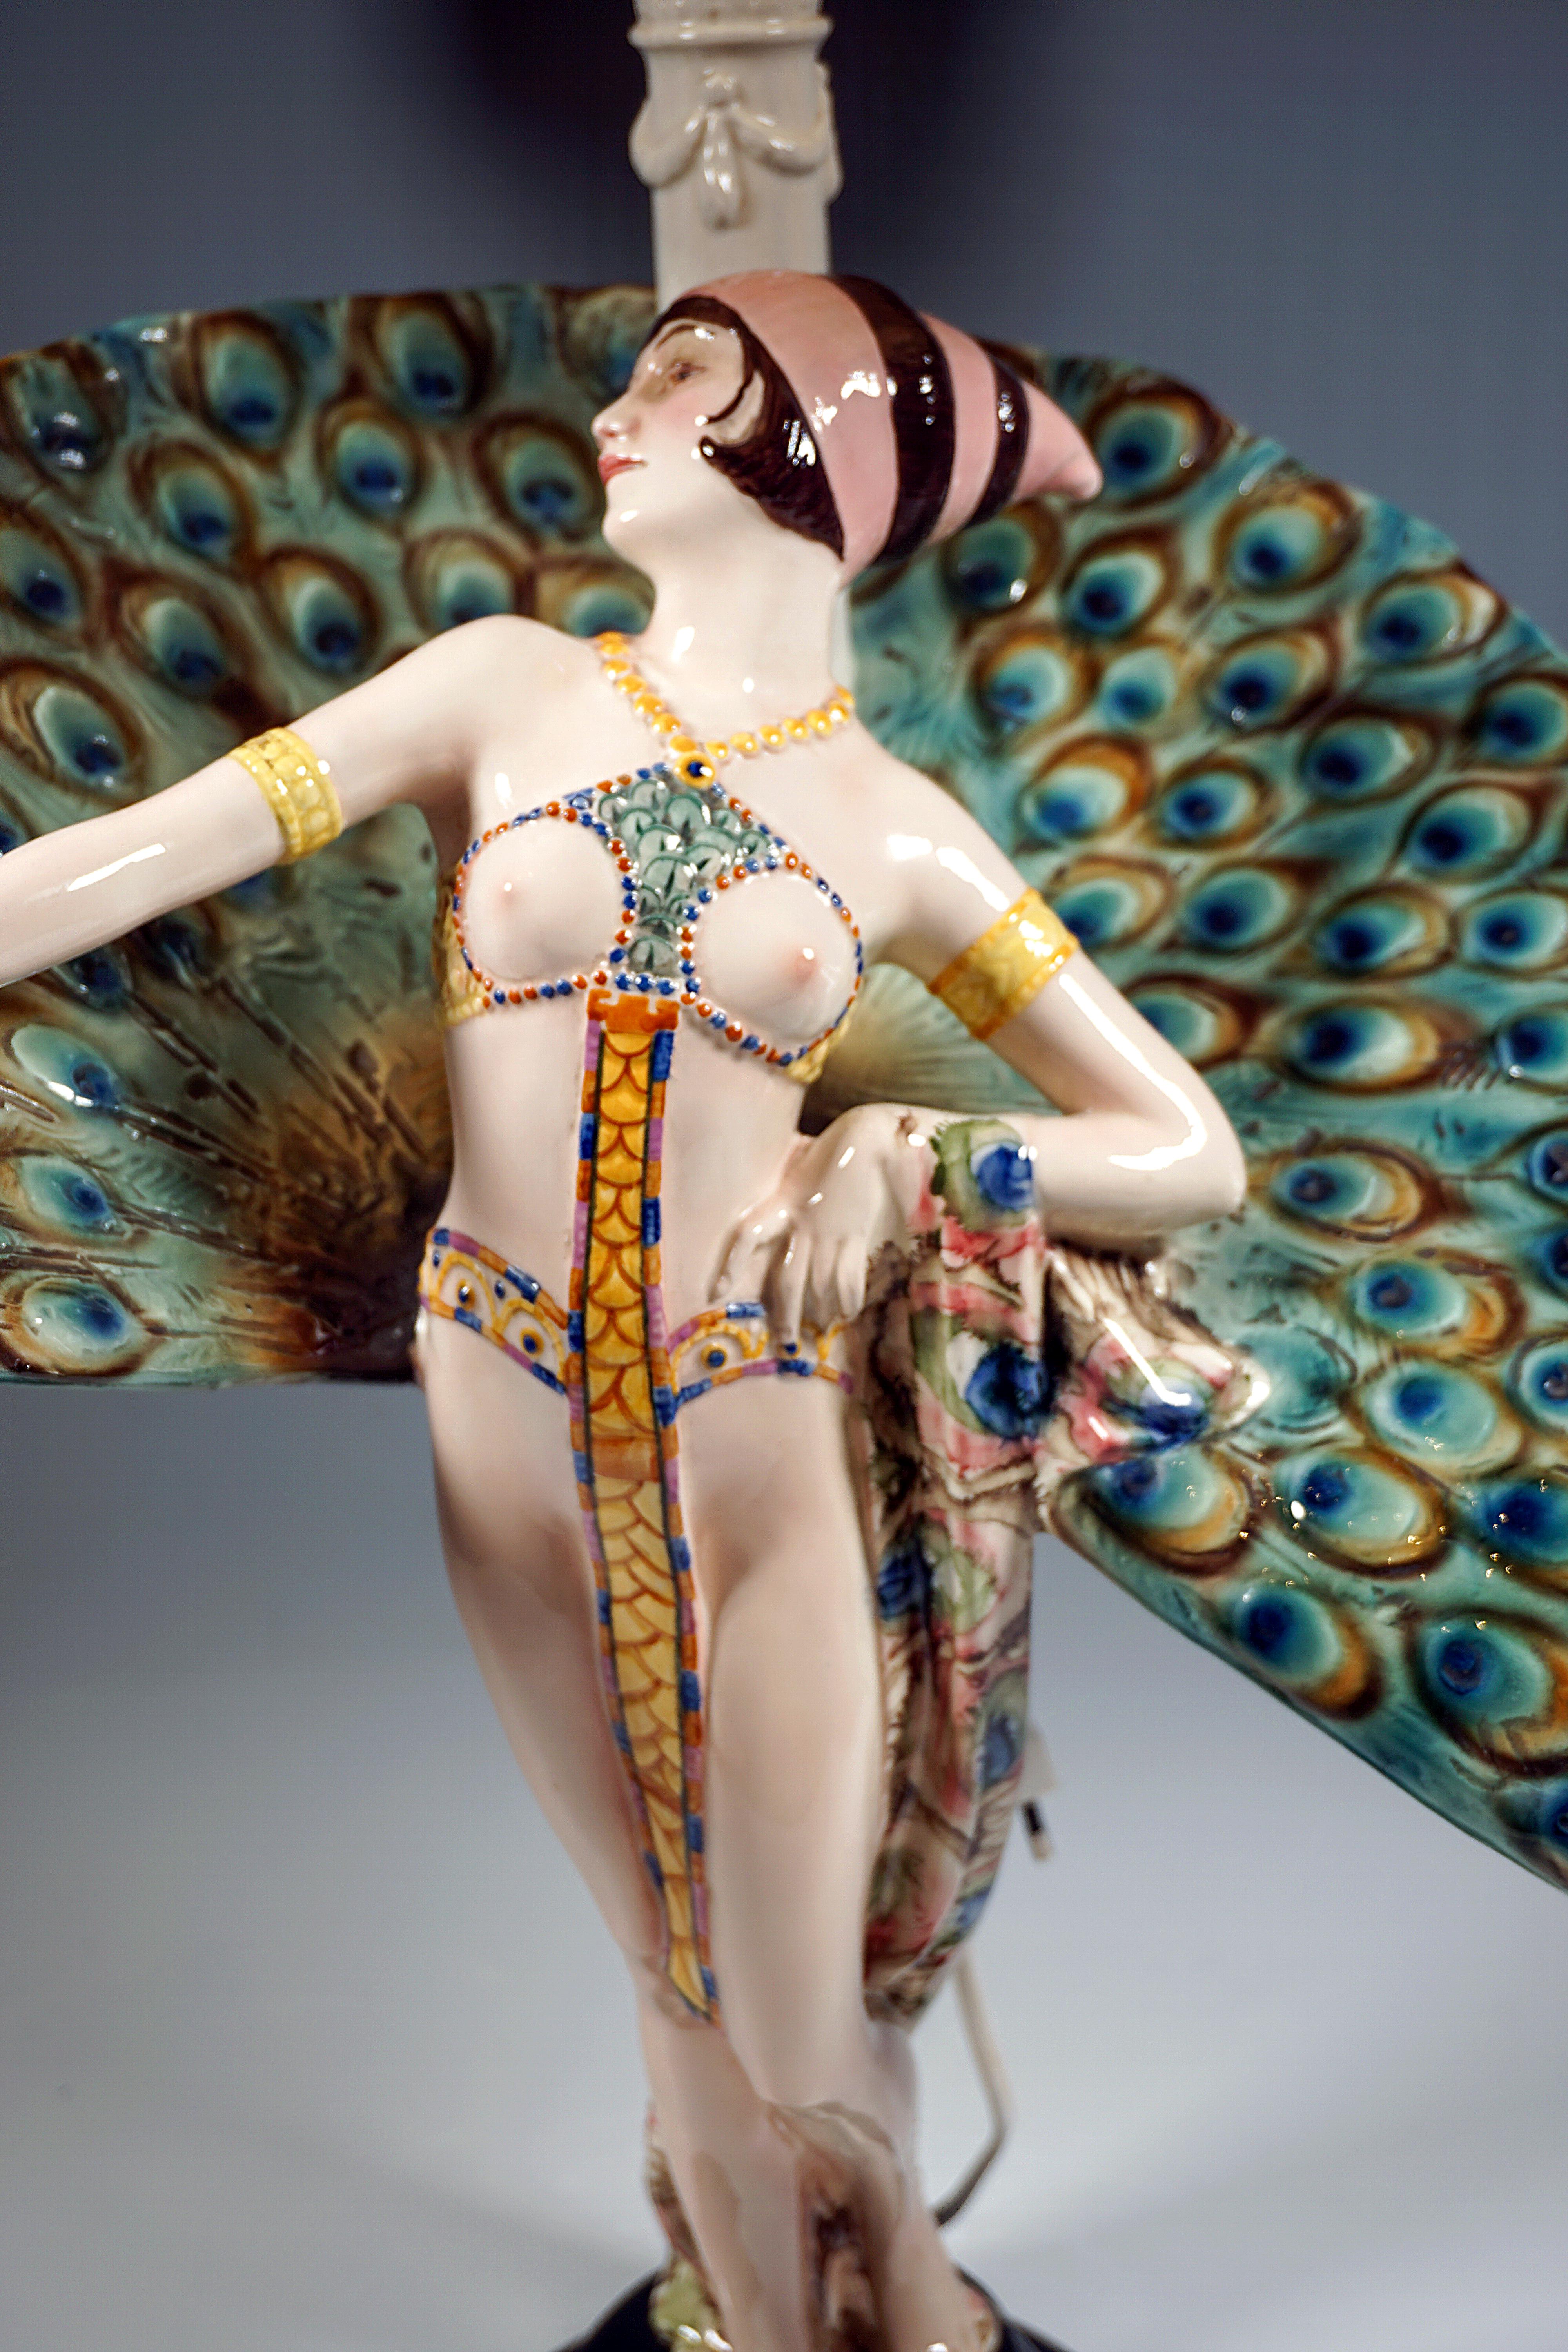 Hand-Crafted Goldscheider Vienna Art-Déco Figure & Lamp, 'Peacock Dancer', by Paul Philippe